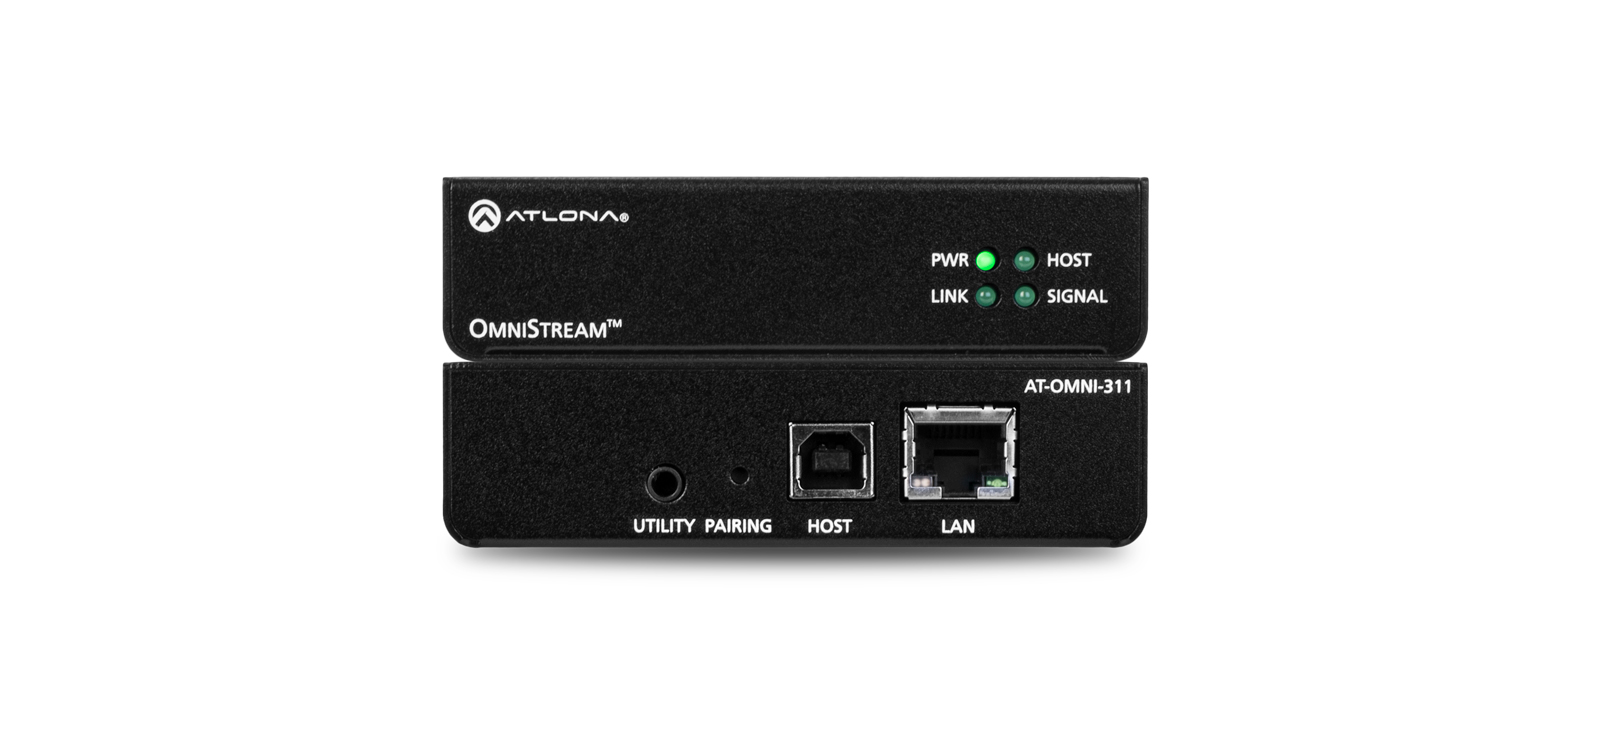 OmniStream IP to Adapter for Devices